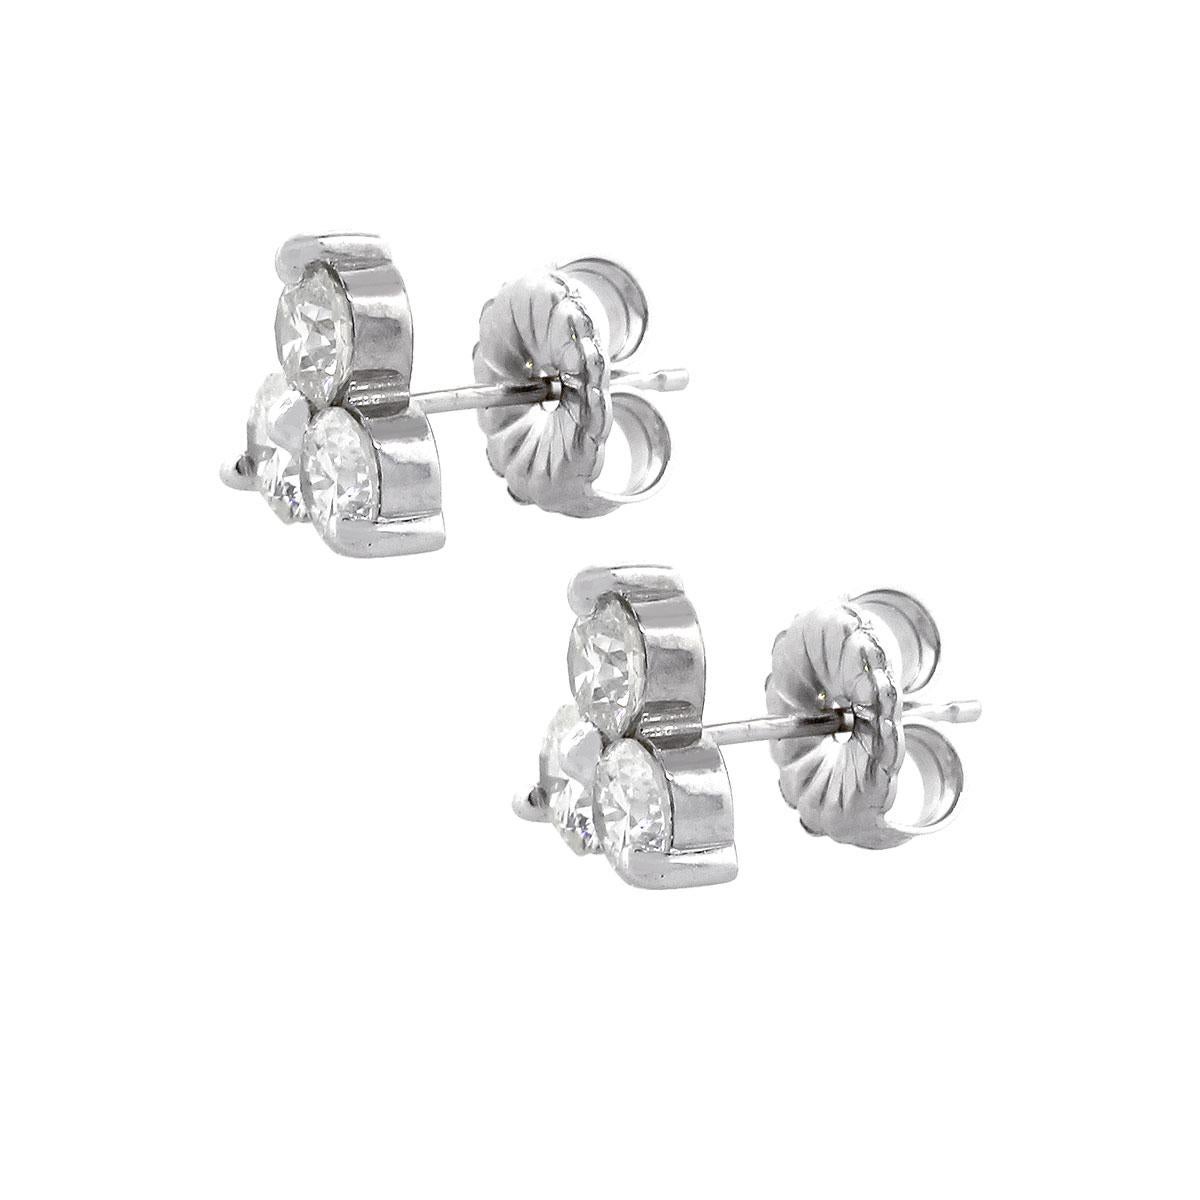 Material: 18k White Gold
Diamond Details: Approx. 1.80ctw of Round Cut Diamonds. Diamonds are G/H in color and SI in clarity
Earring Measurements: 0.51″ x 0.33″ x 0.33″
Total Weight: 2.9g (1.8dwt)
Earring backs: Tension post
SKU: G8615